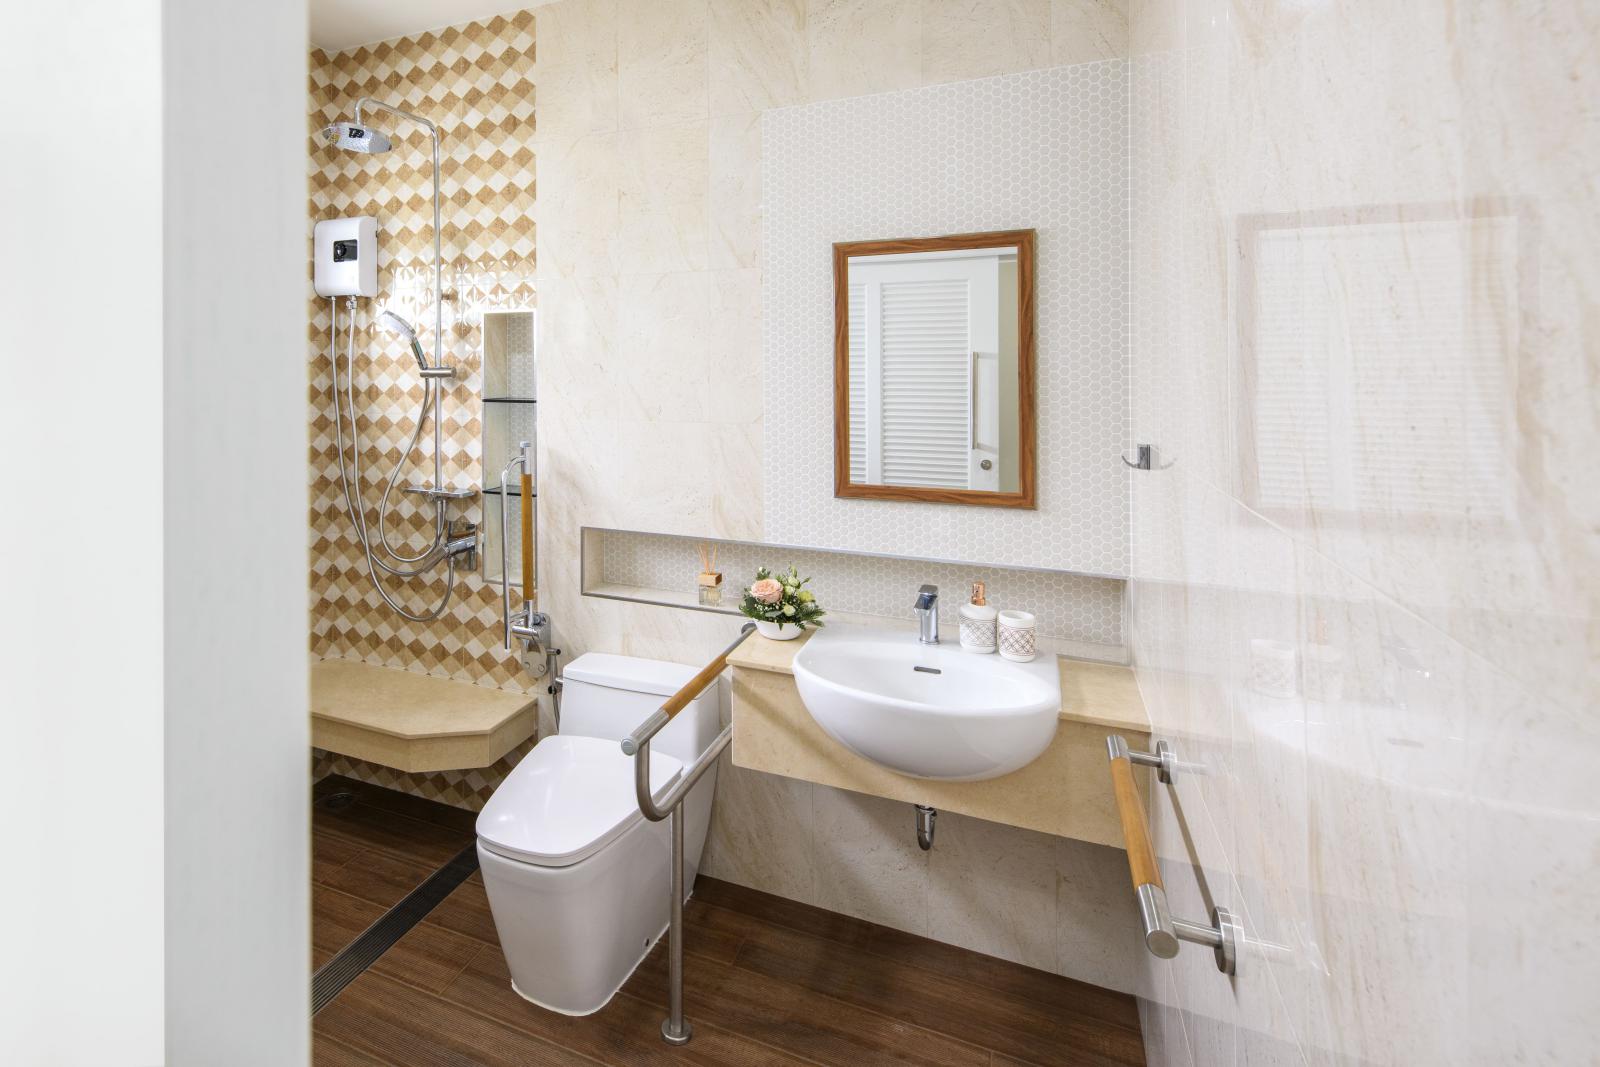 Image of bathroom with grab bars next to toilet and on wall